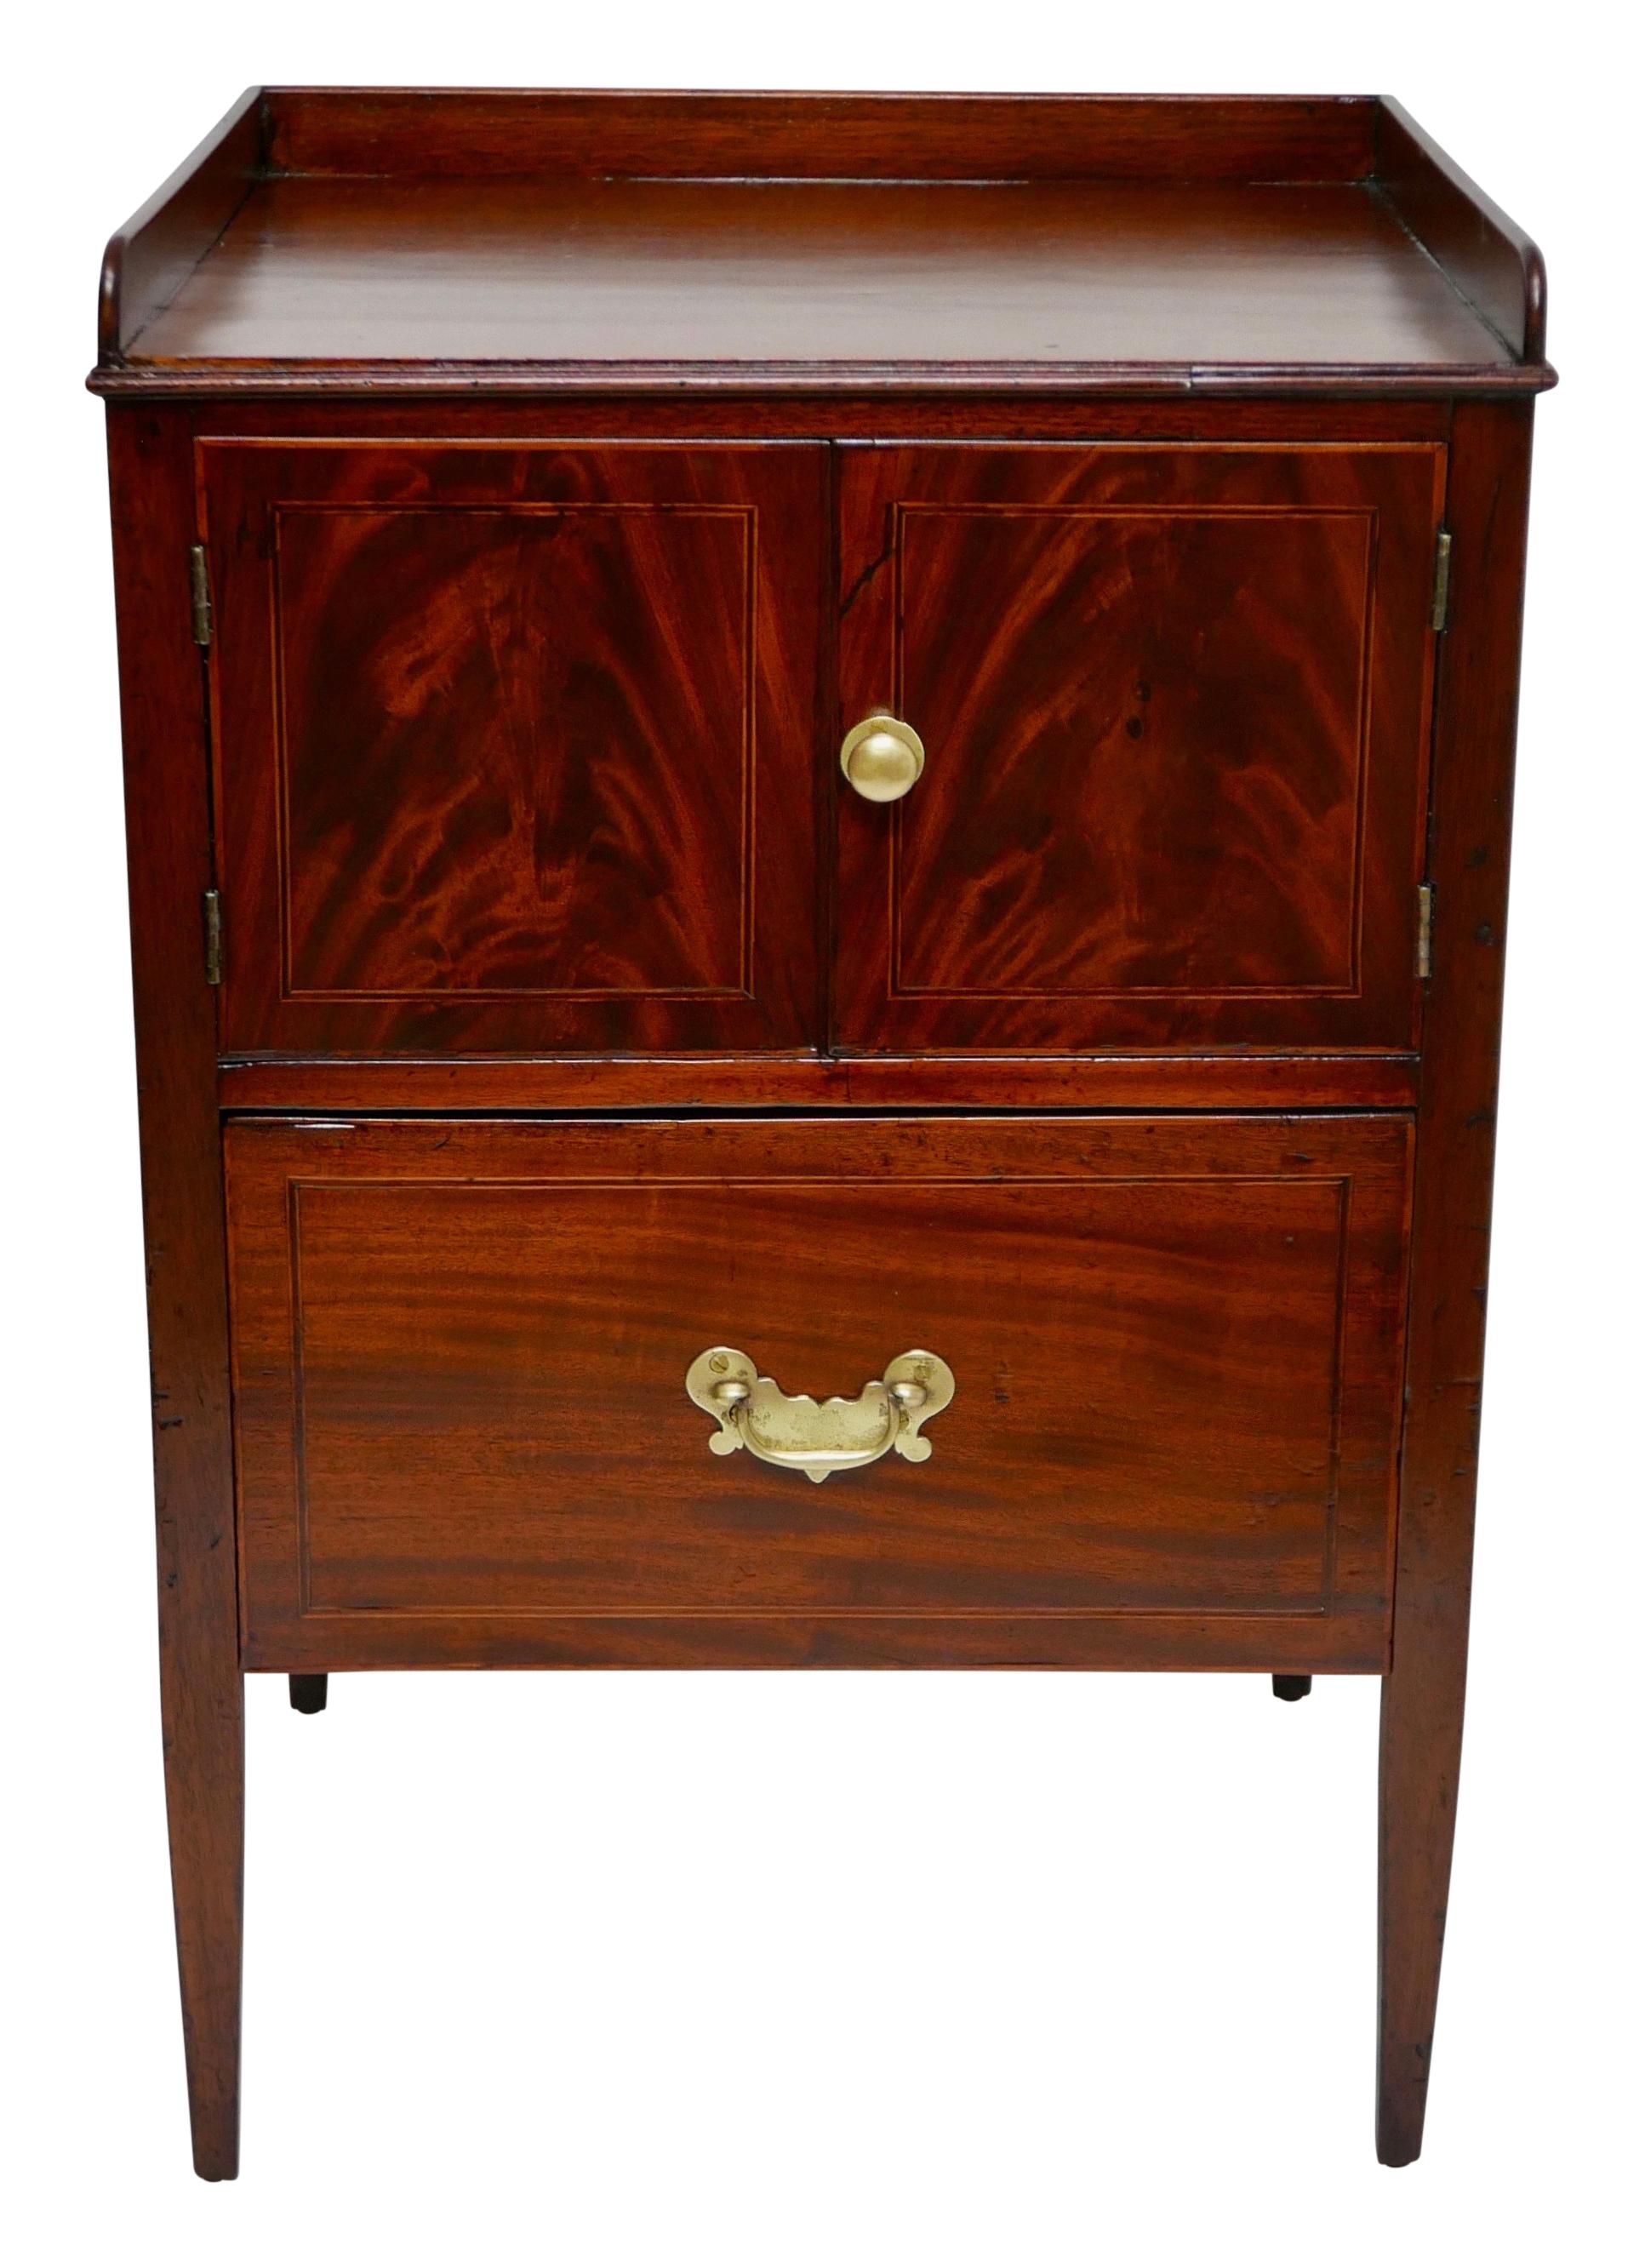 Mahogany washstand or side table with a small cabinet and a single drawer. England, mid-19th century.

   